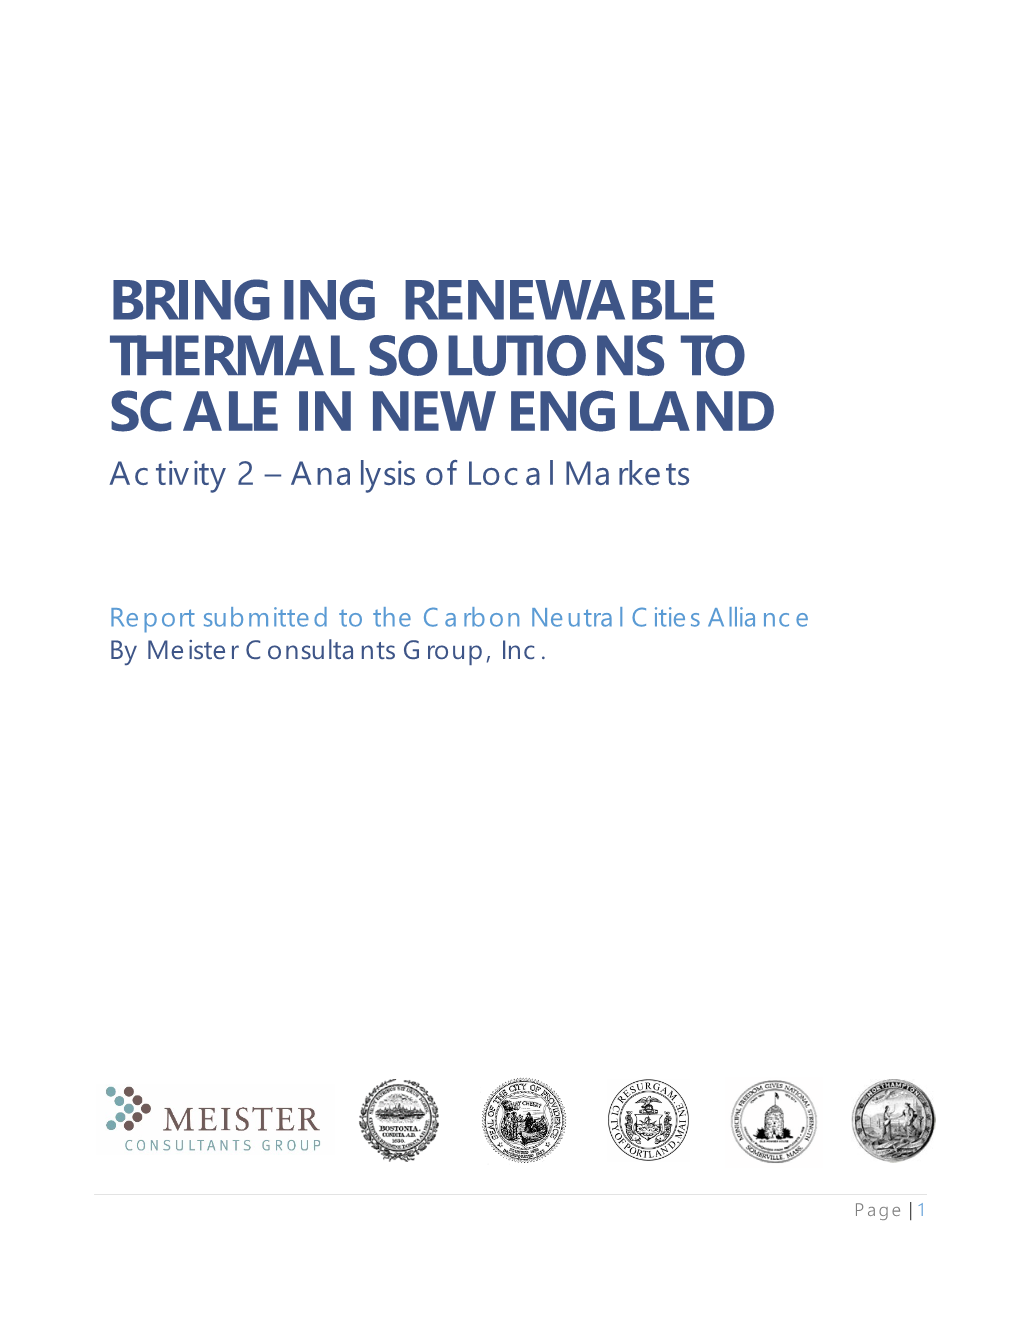 BRINGING RENEWABLE THERMAL SOLUTIONS to SCALE in NEW ENGLAND Activity 2 – Analysis of Local Markets